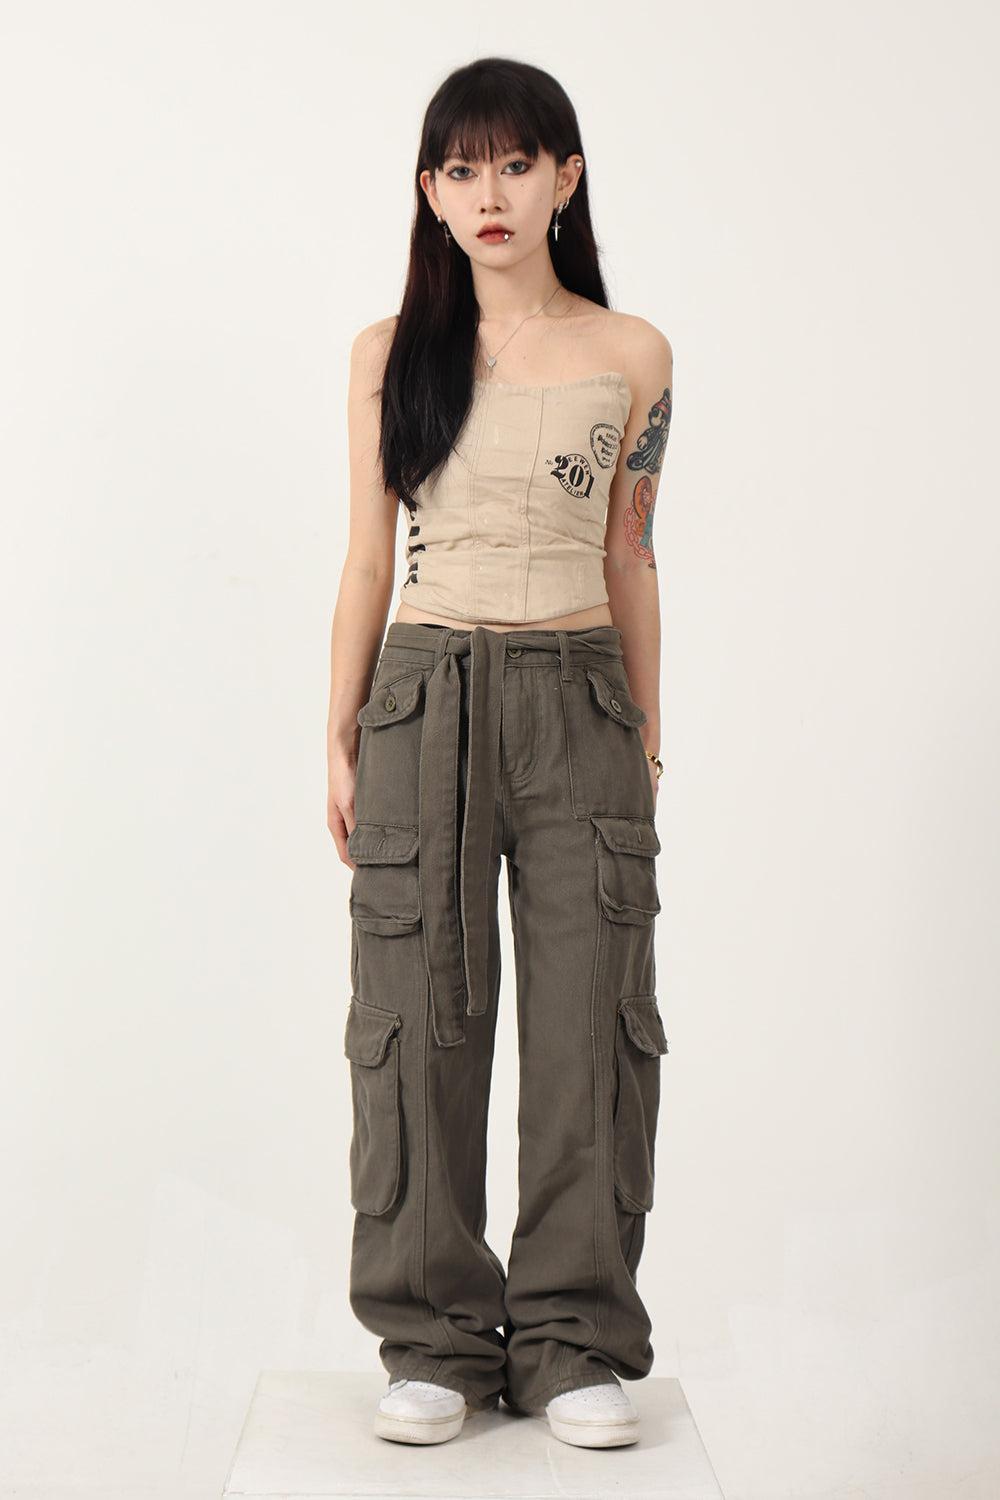 Yuppie Style Cargo Pants Korean Street Fashion Pants By Jump Next Shop Online at OH Vault